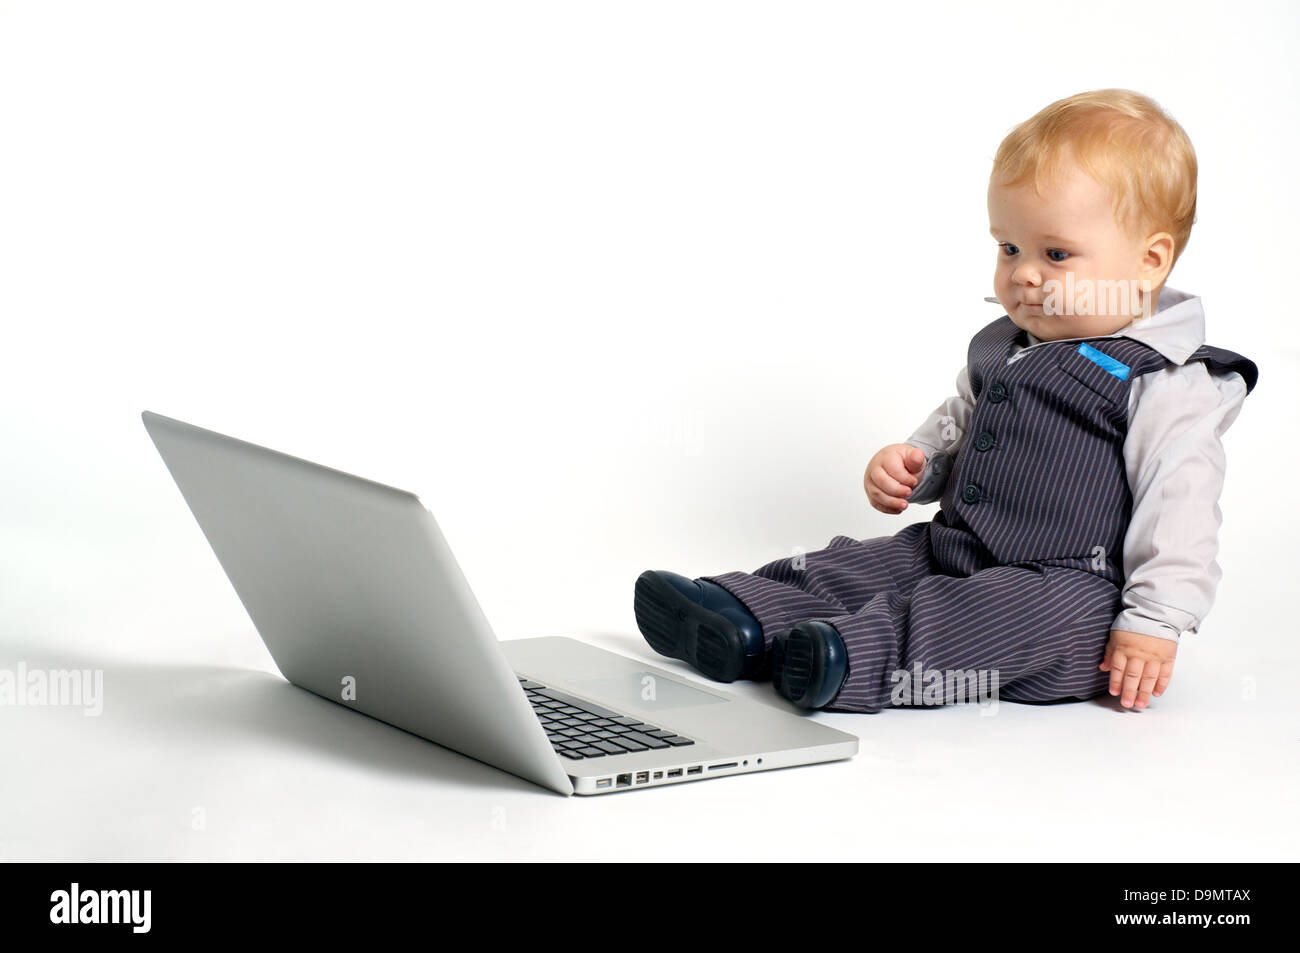 blond baby in suit working with laptop Stock Photo